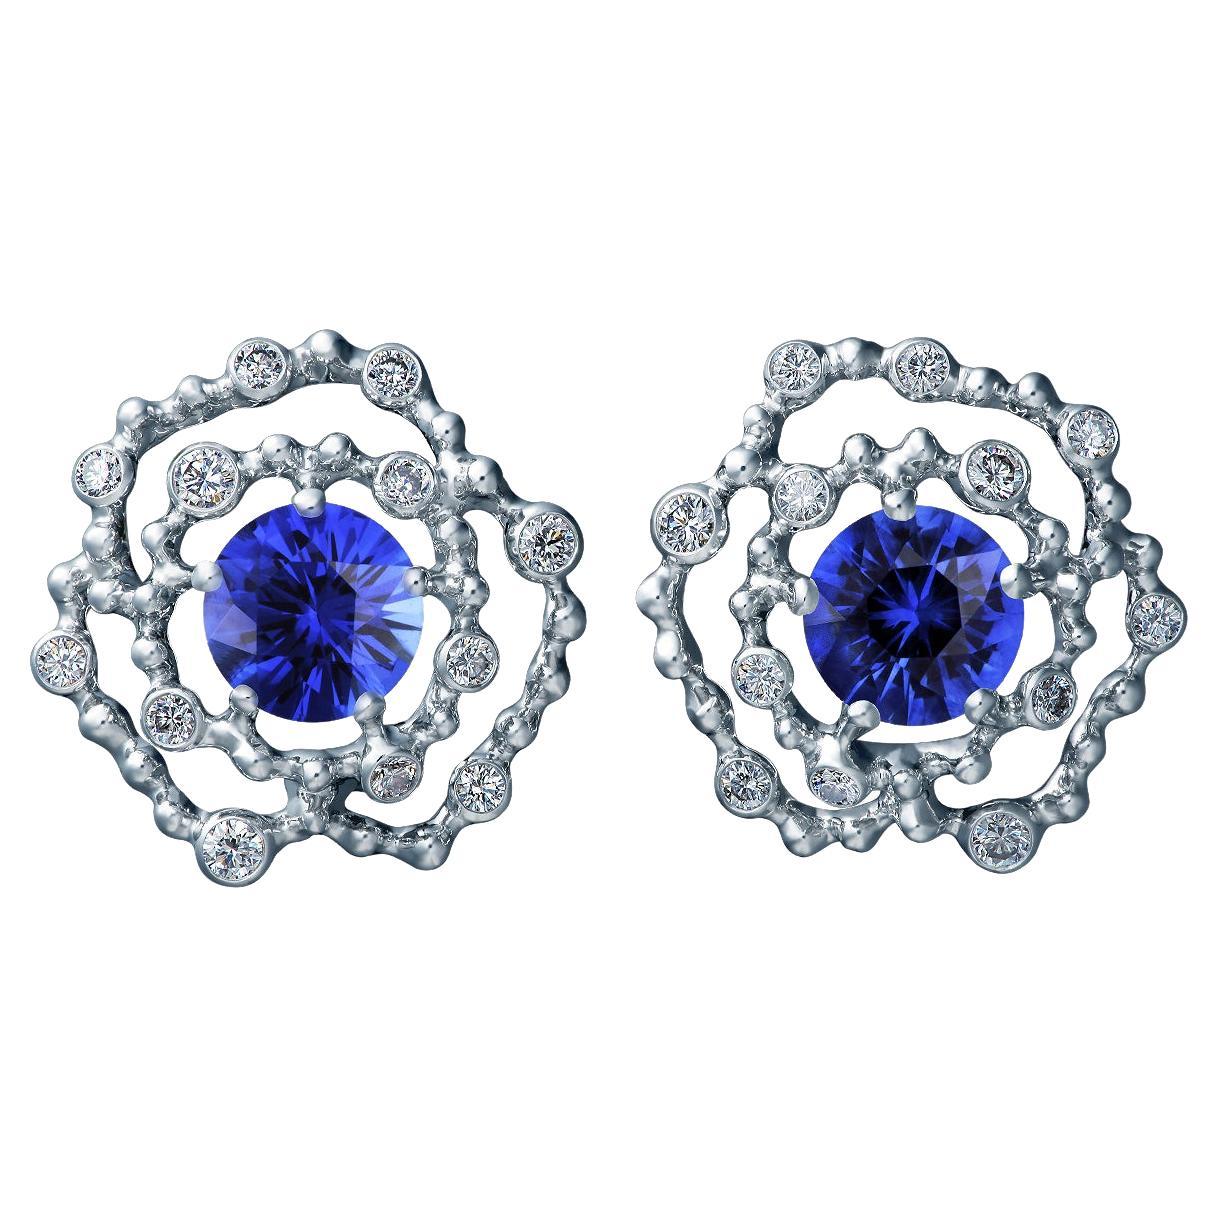 18 Karat White Gold Earrings with 2.46 Carat Sapphires and 0.43 Carat Diamonds